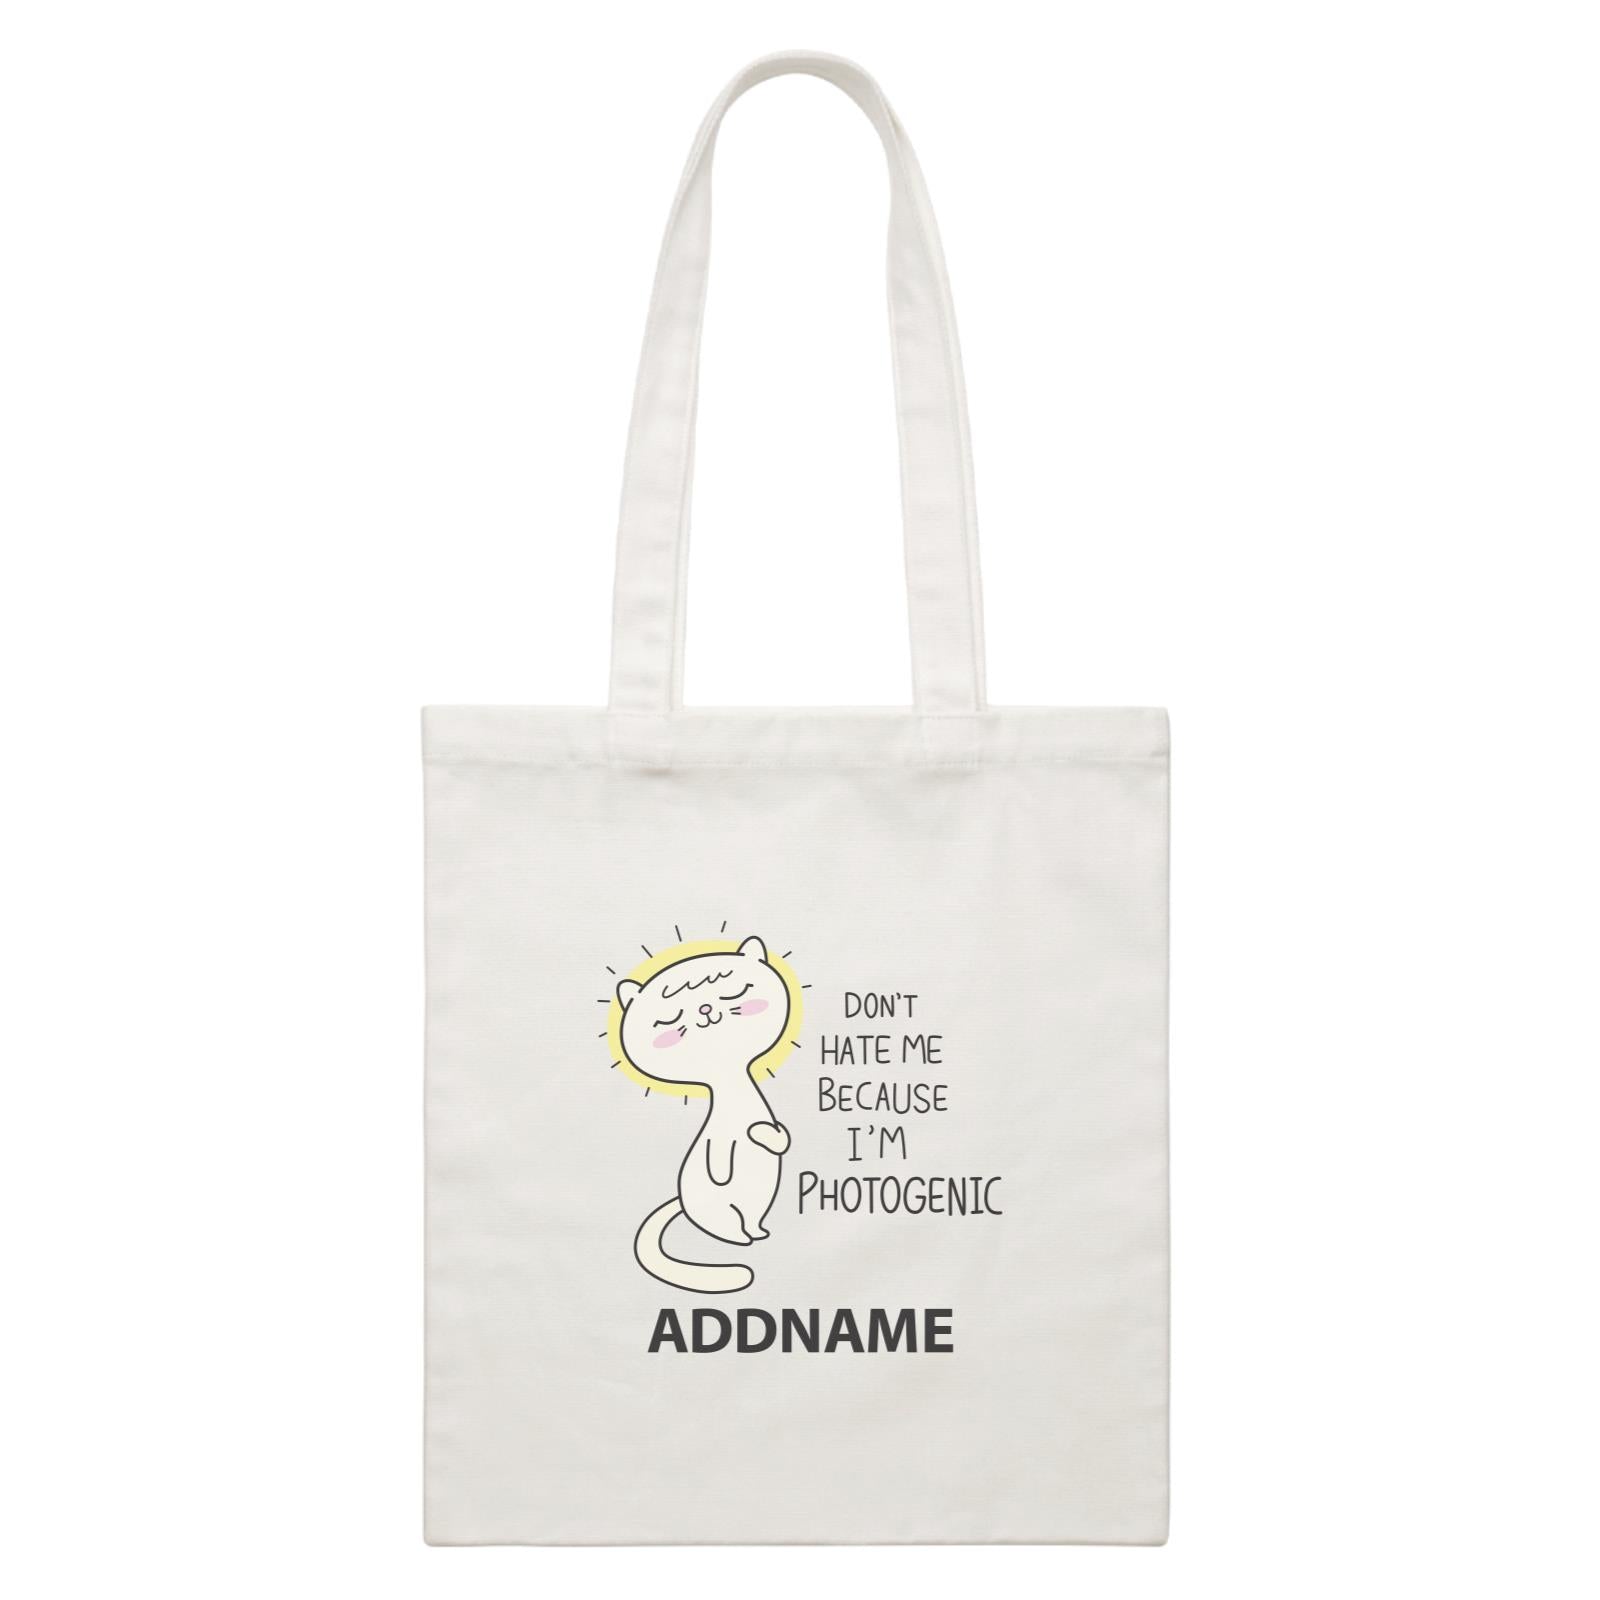 Cool Cute Animals Cats Don't Hate Me Because I'm Photogenic Addname White Canvas Bag